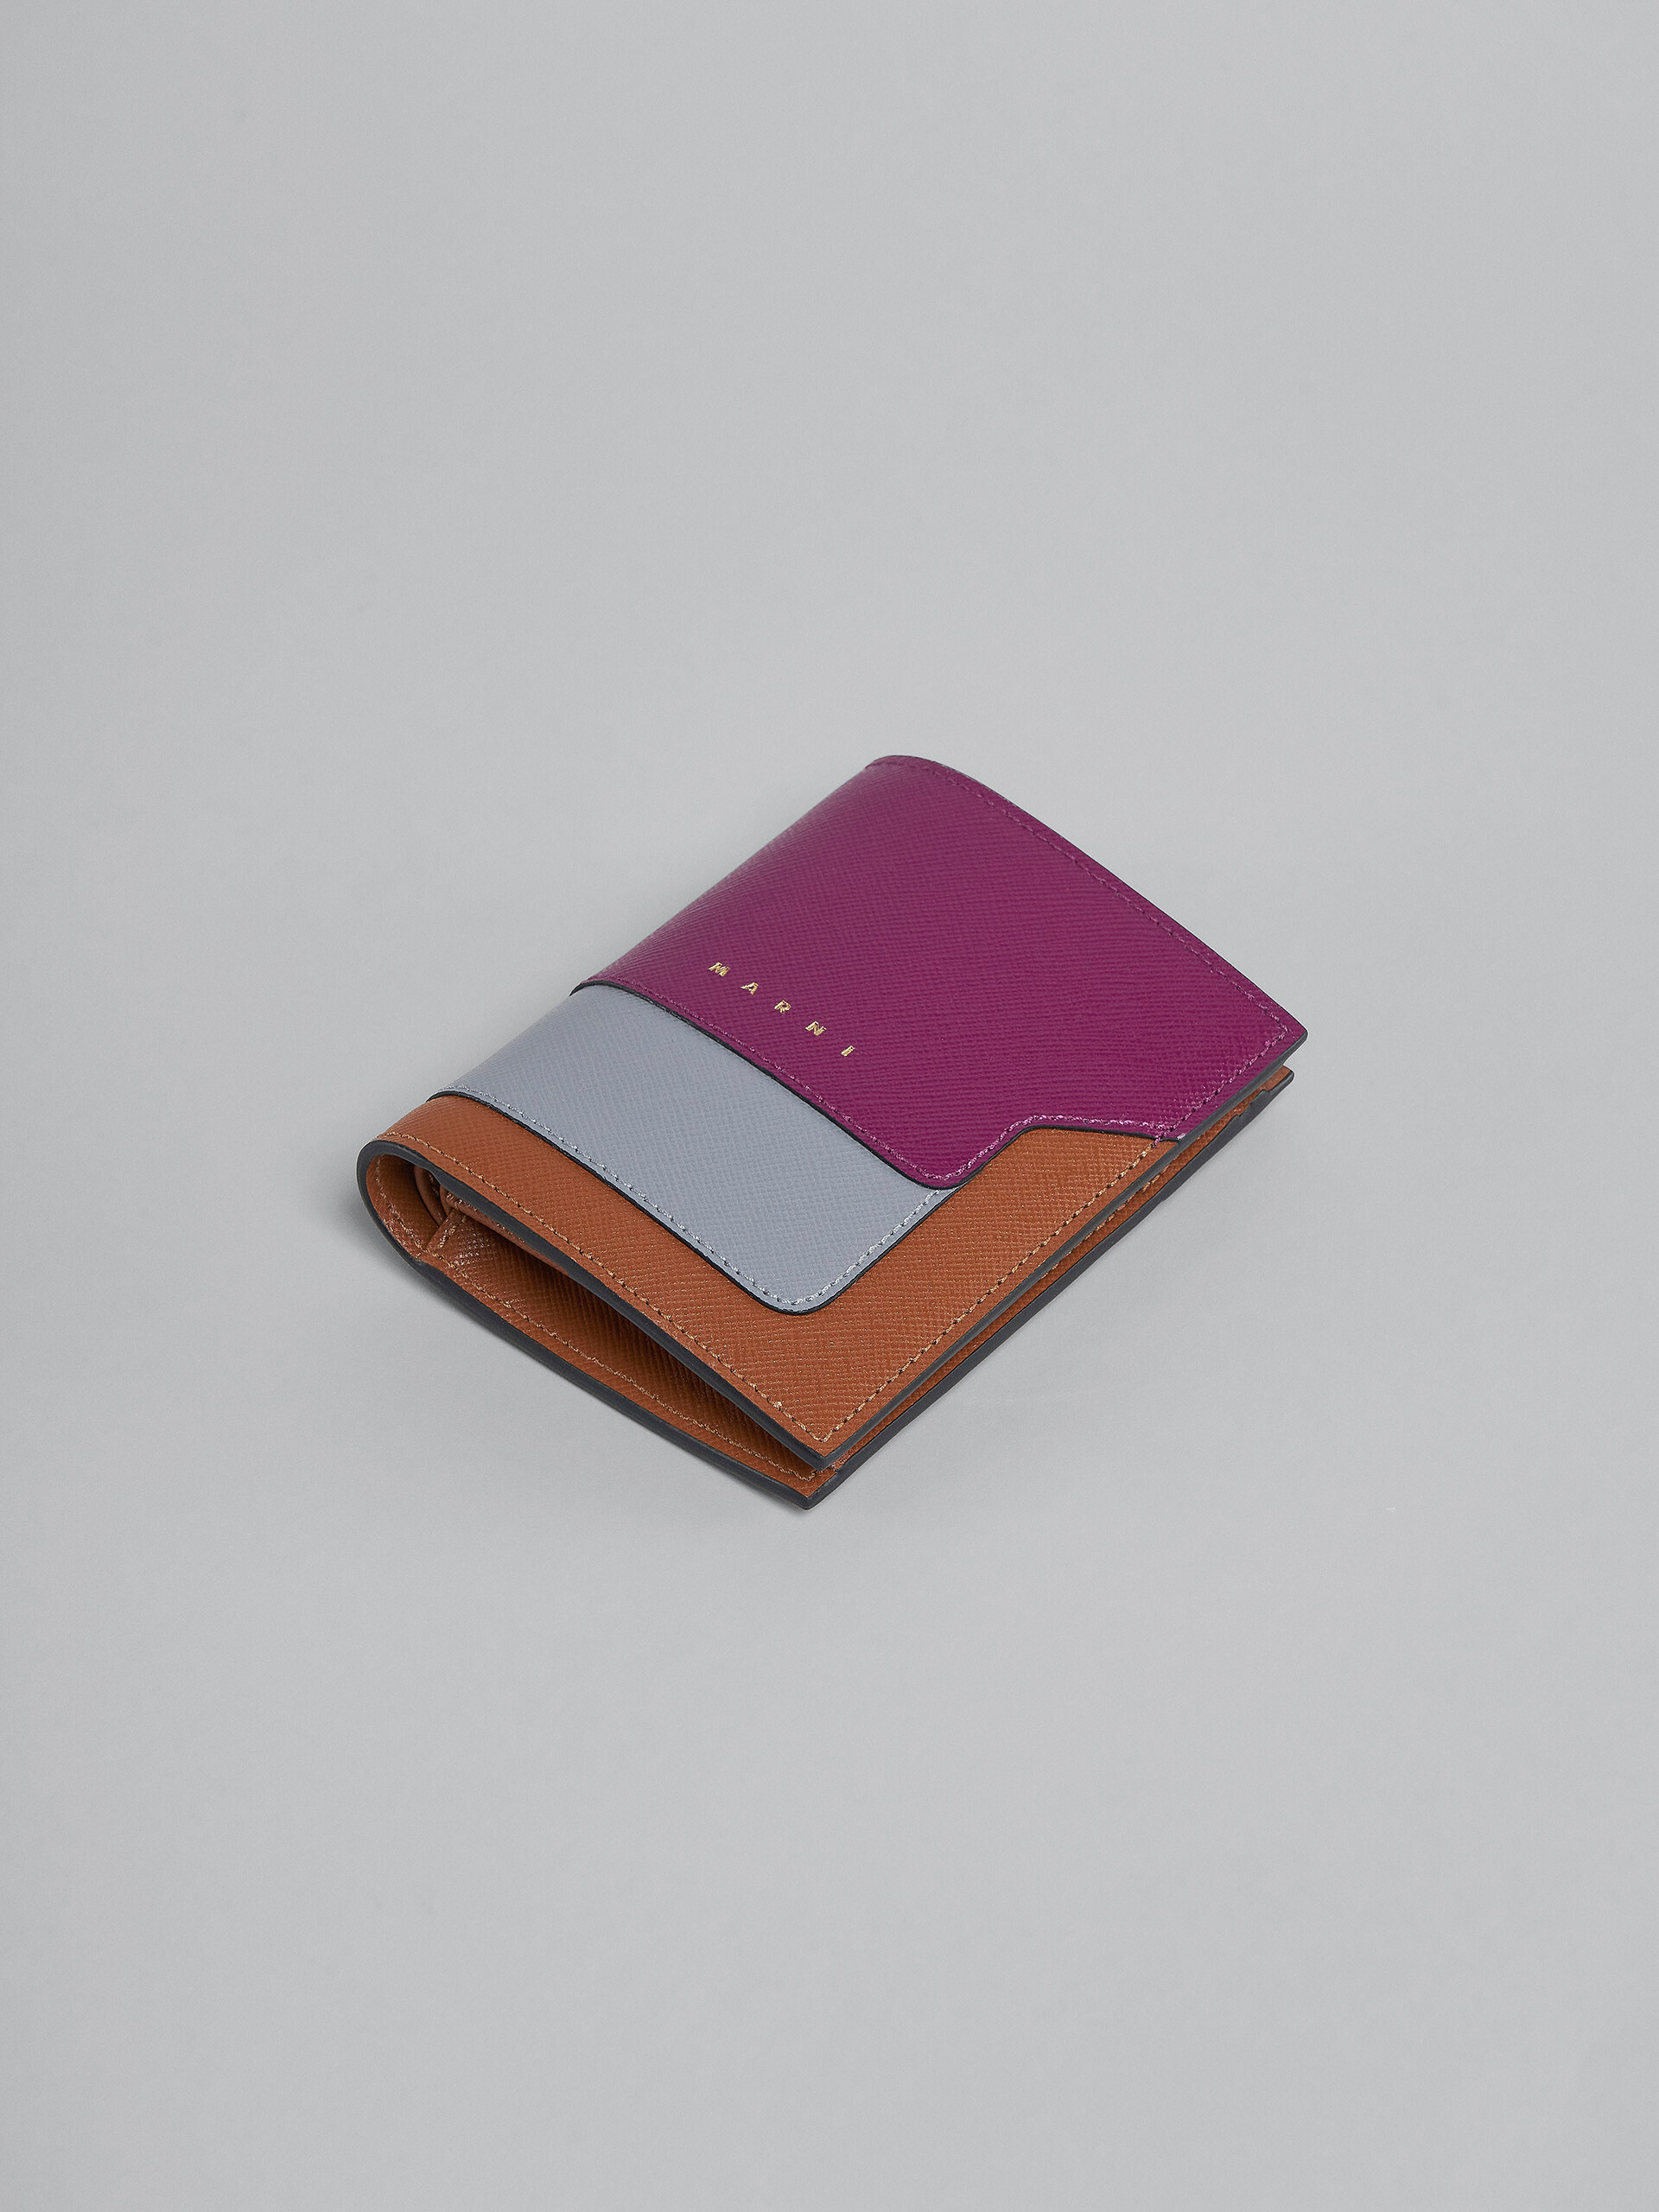 Purple grey and brown saffiano leather bi-fold wallet - Wallets - Image 5